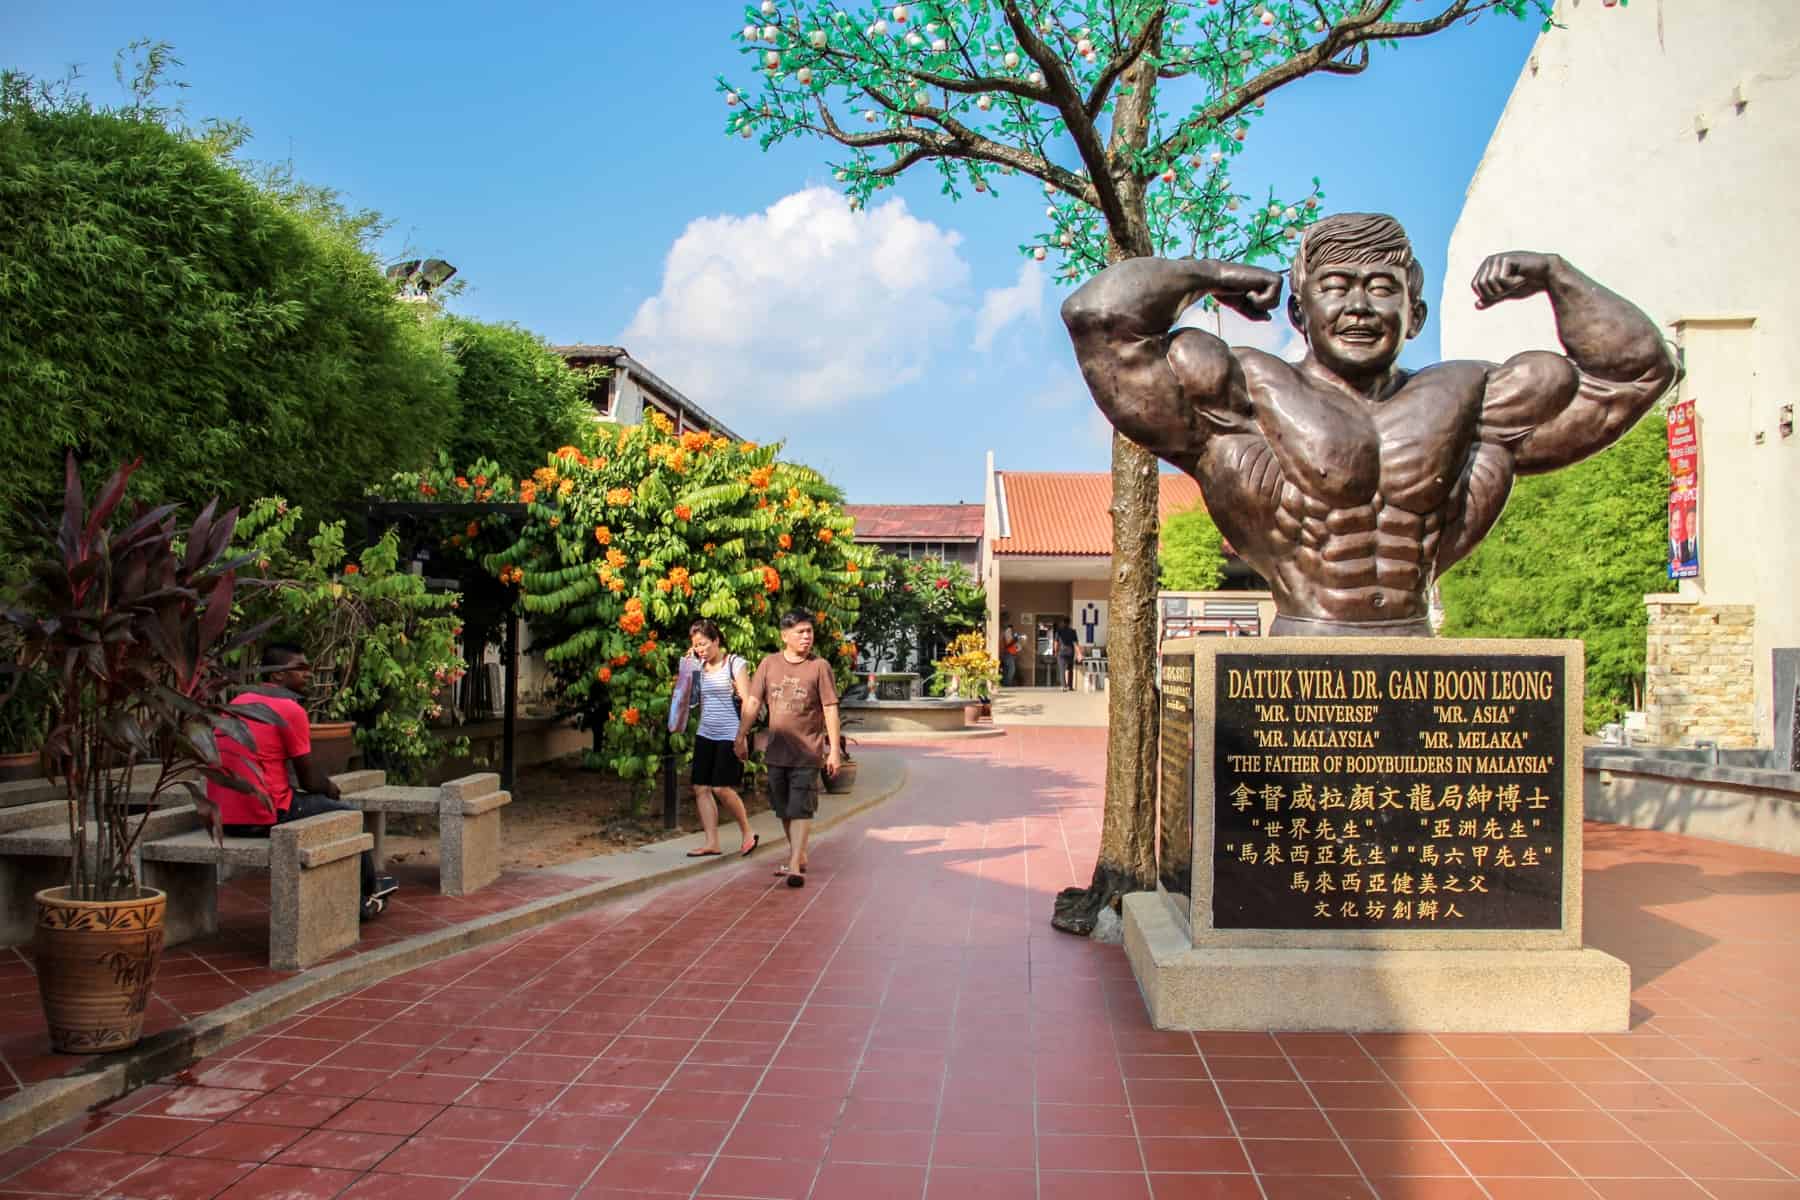 The bronze statue of a famous bodybuilder from Malaysia, found in Melaka old town